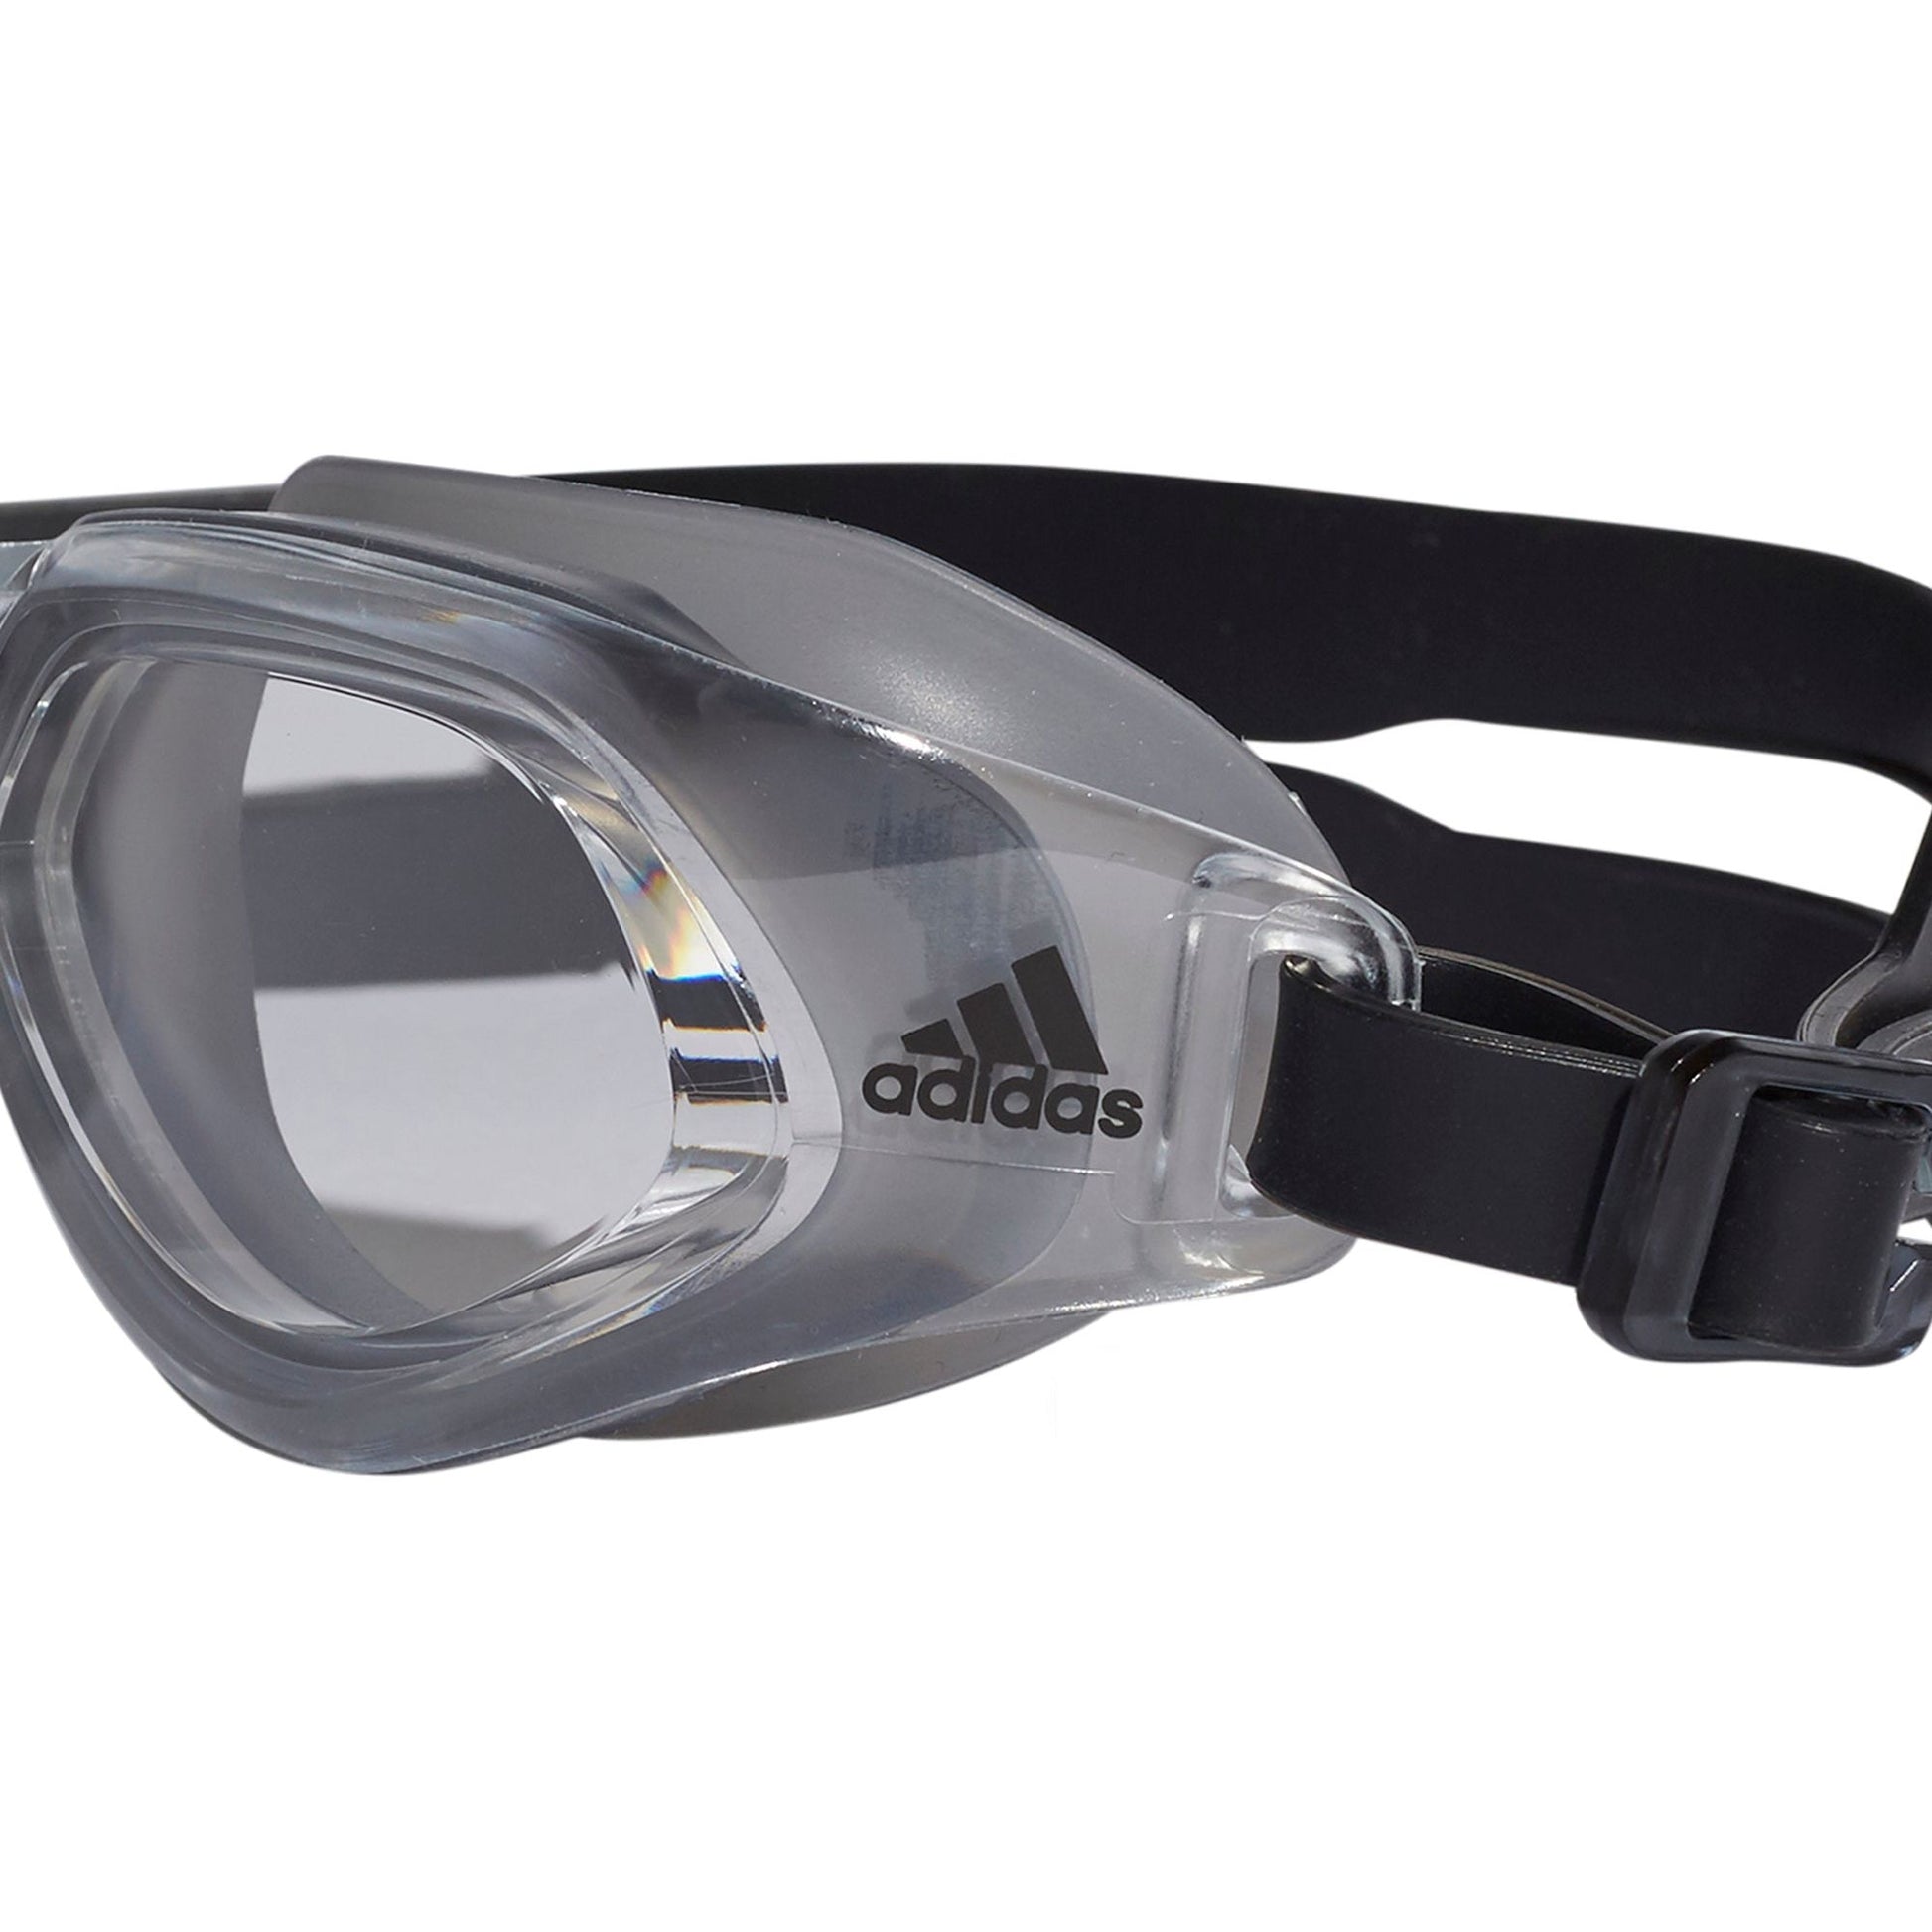 Adidas Persistar Fit Swimming Goggles Br1065 Details